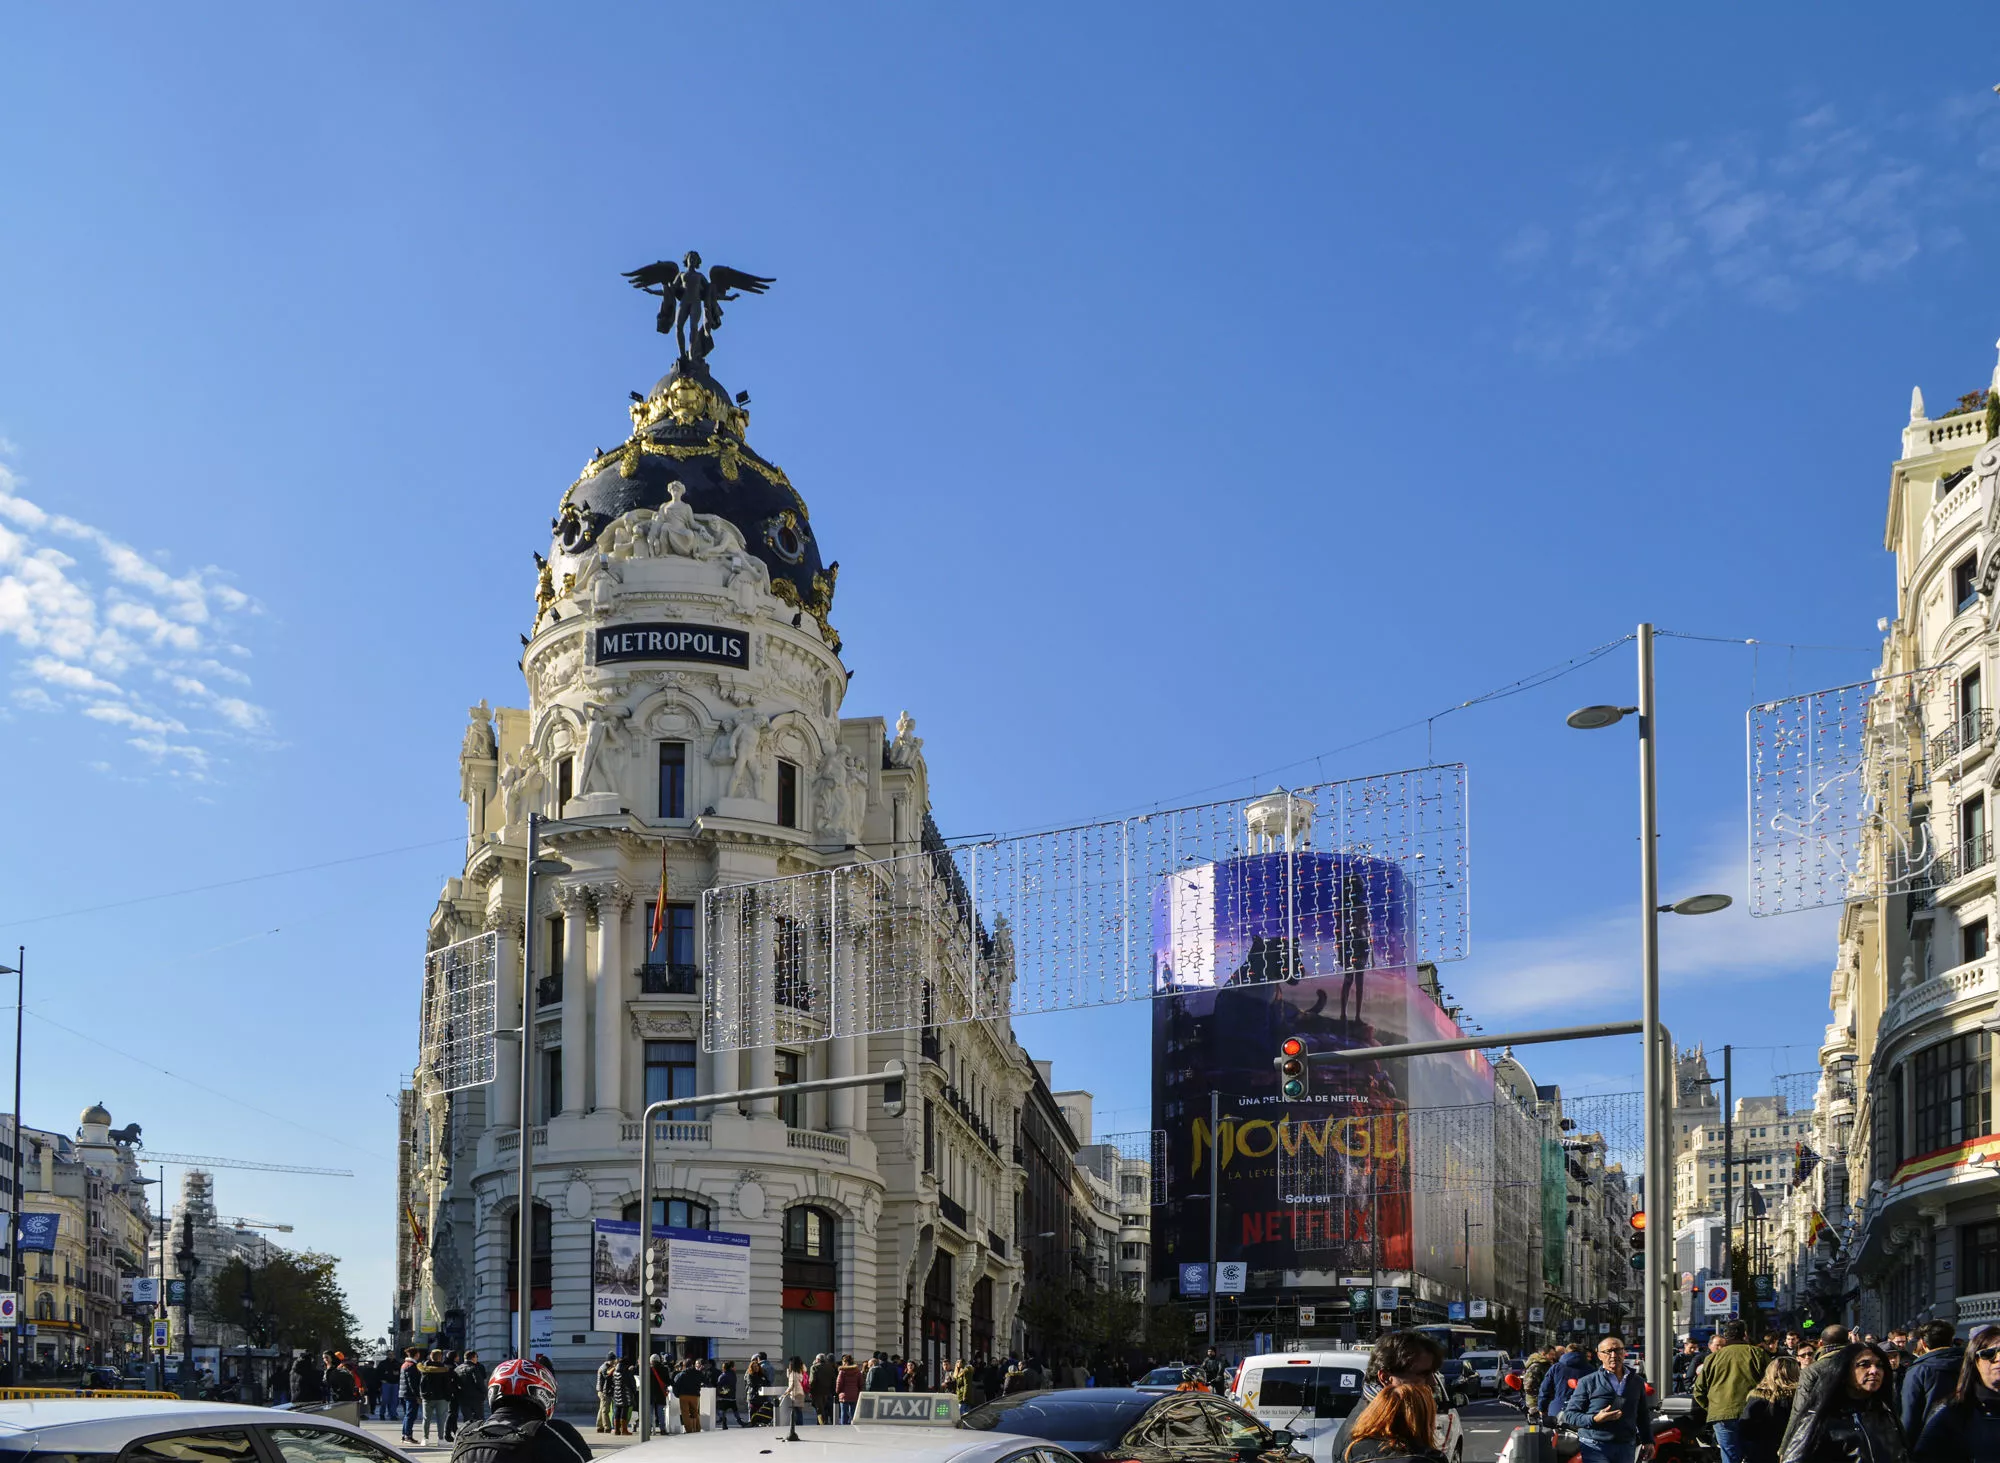 Metropolis Building in Spain, Europe | Architecture - Rated 3.8